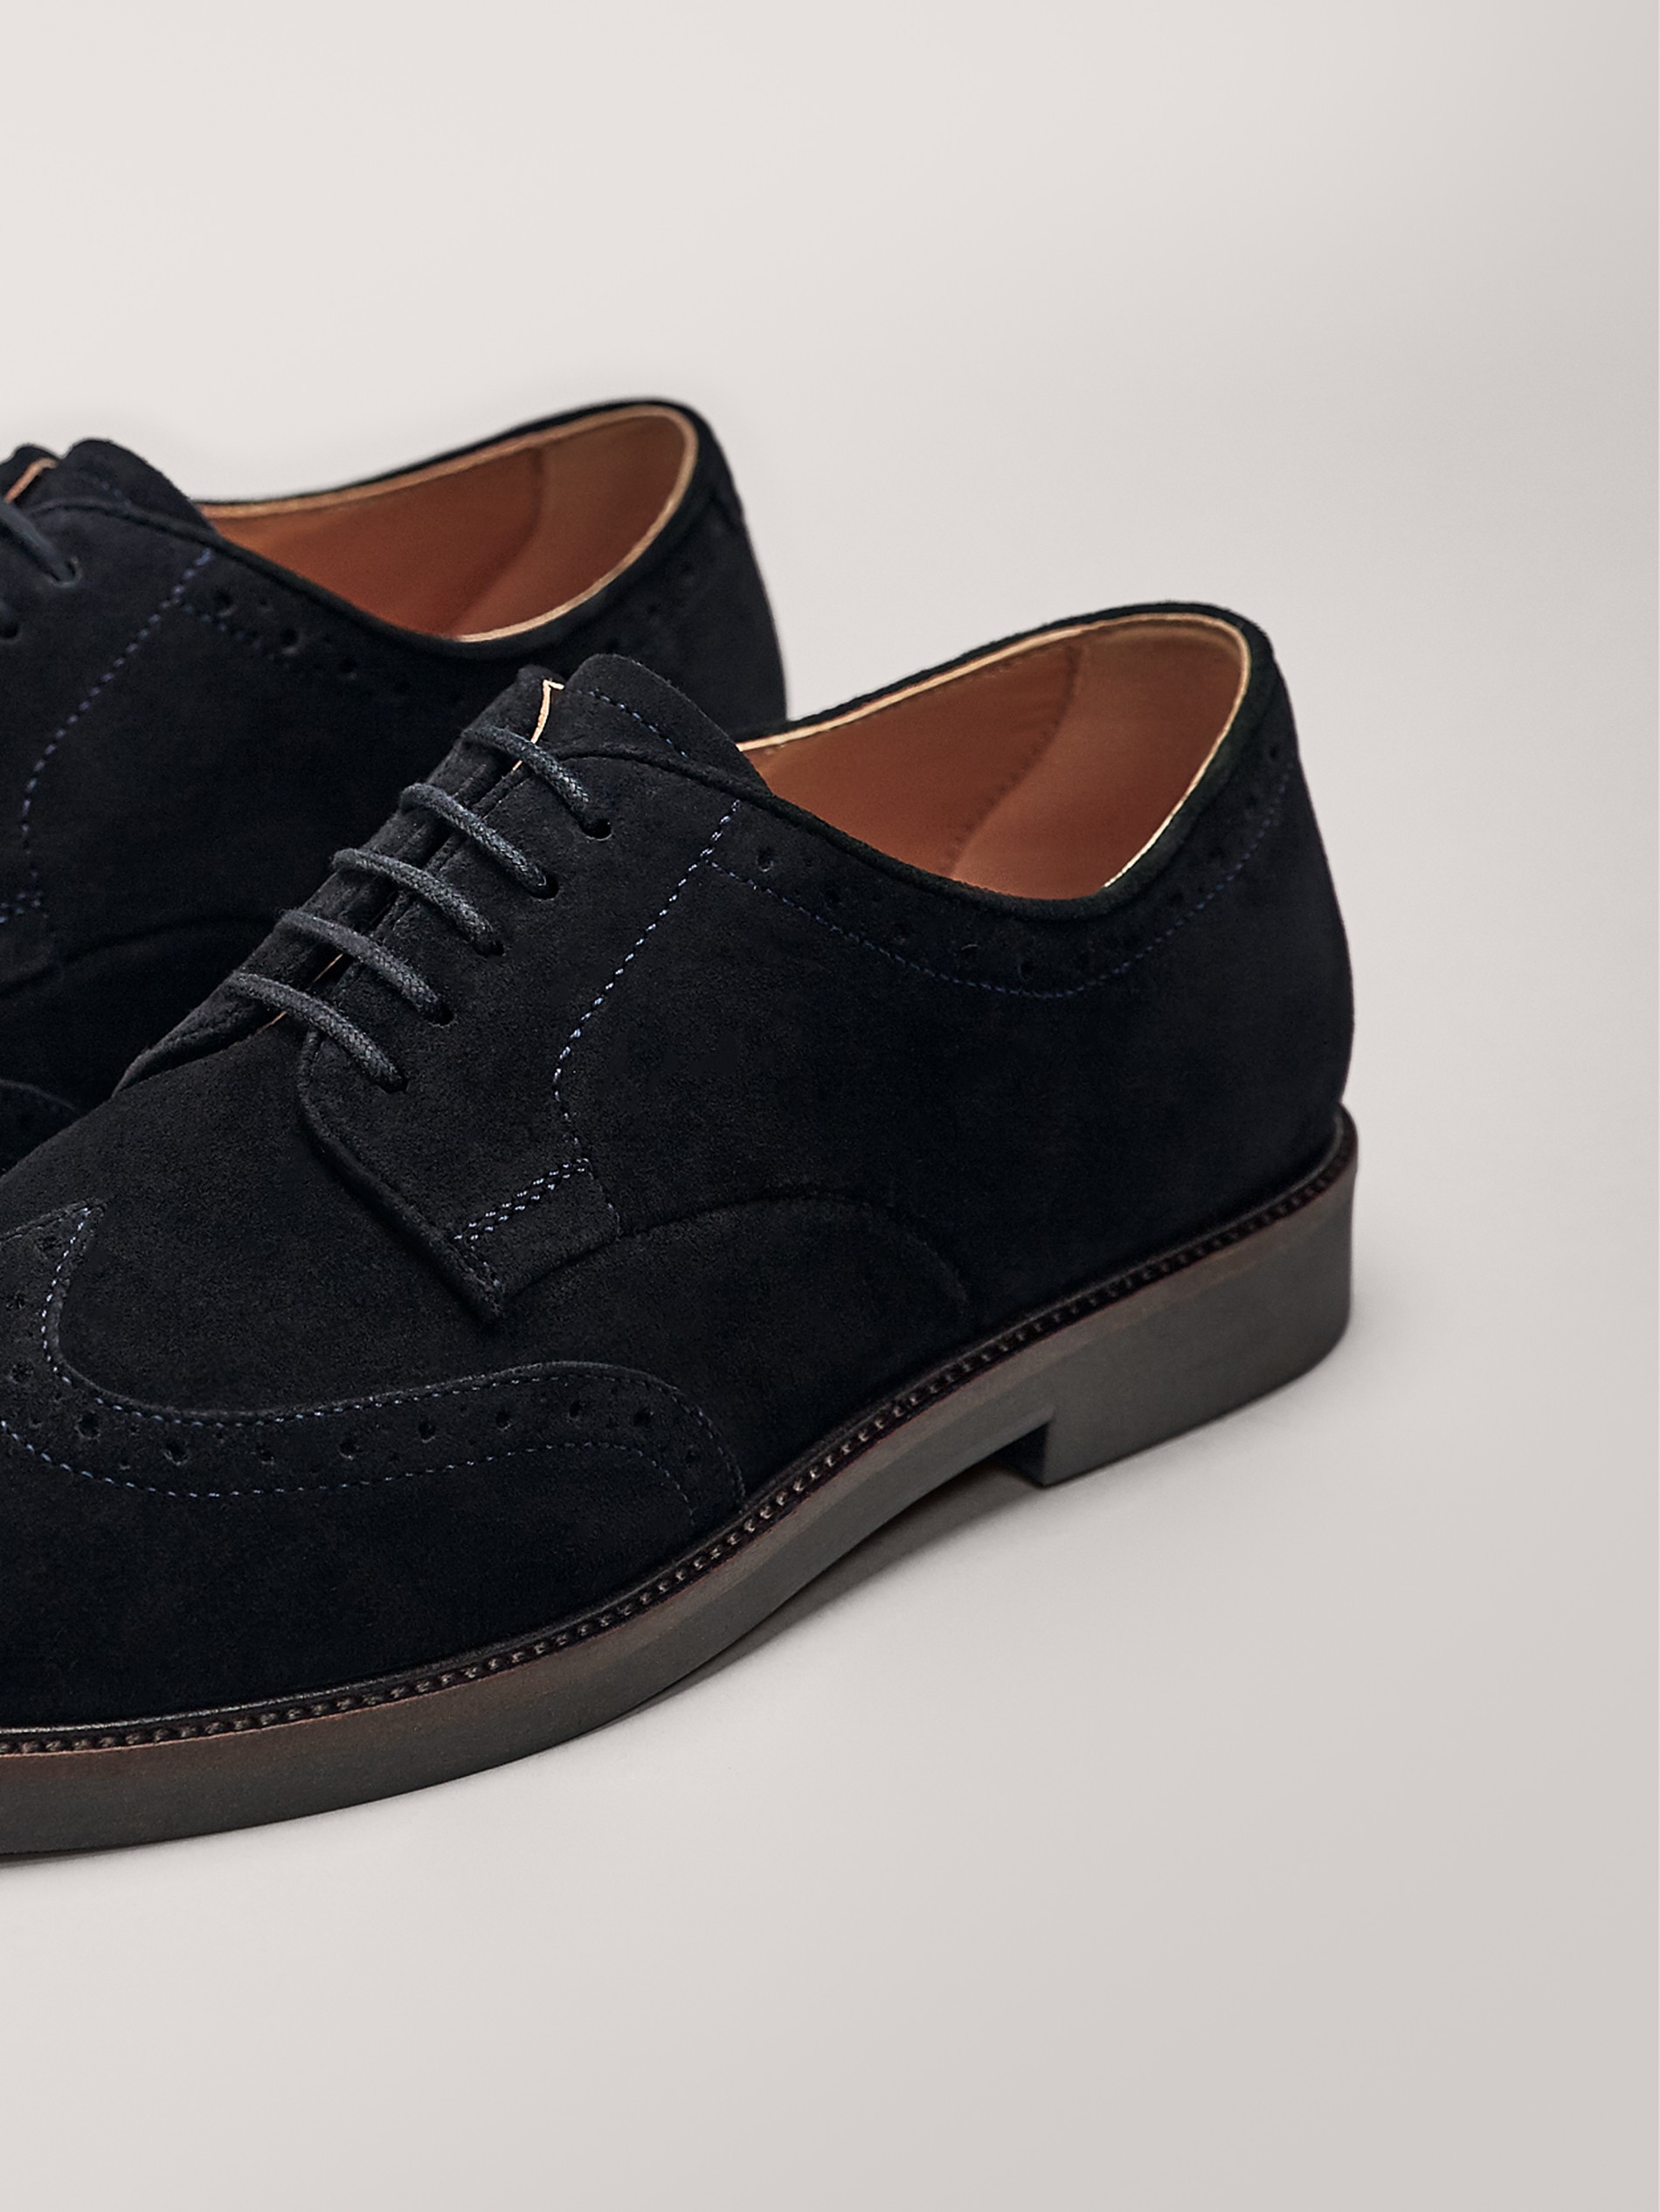 massimo dutti suede shoes